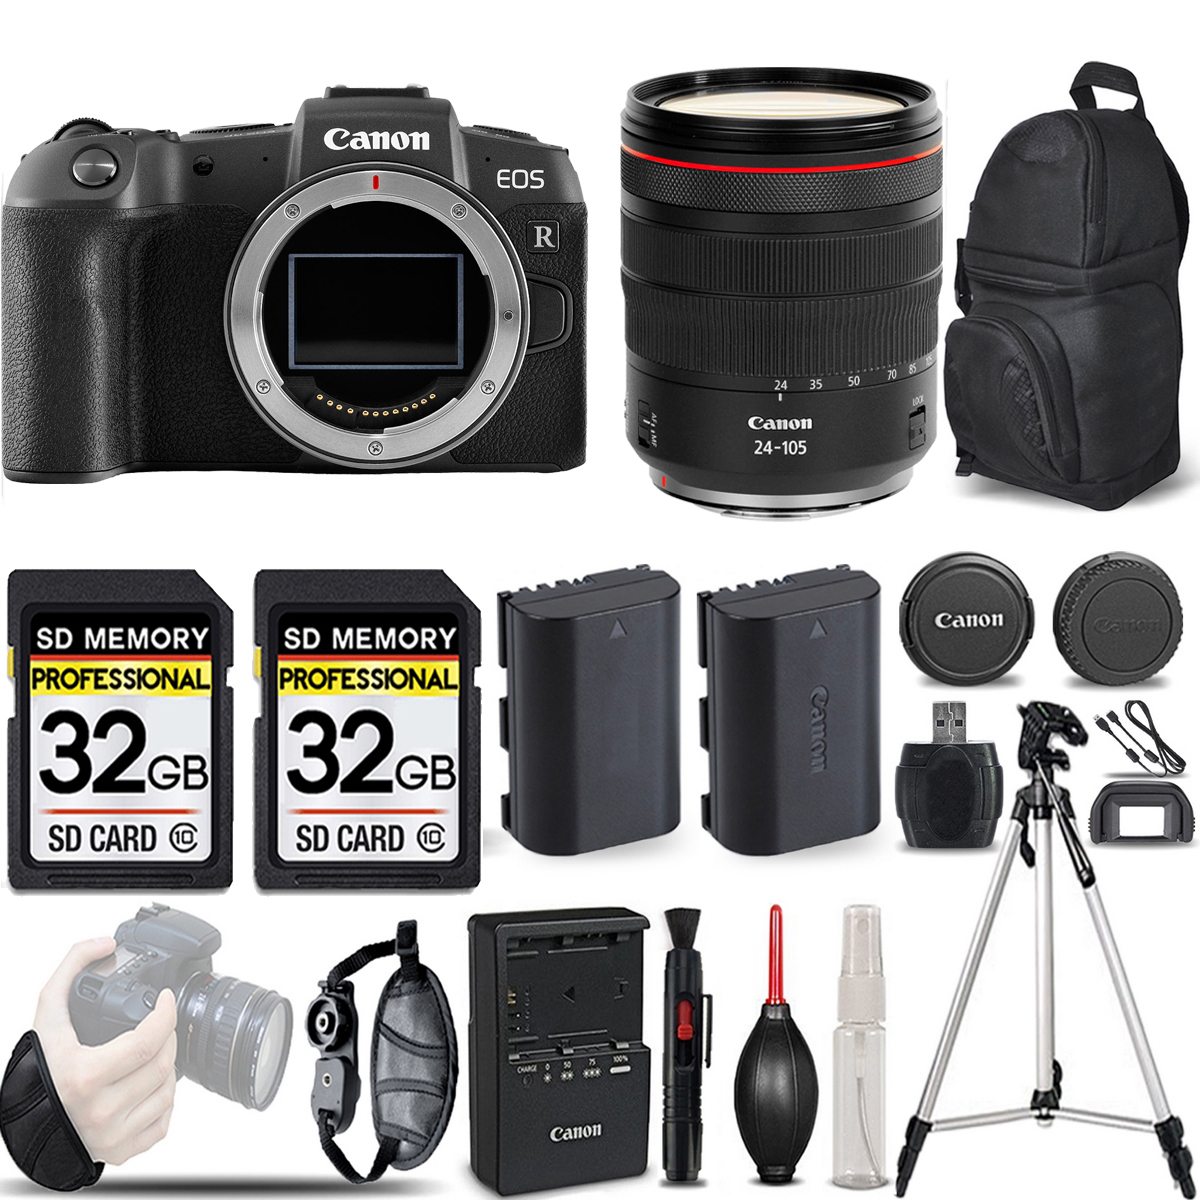 EOS RP Mirrorless 26.2MP SLR Camera + 24-105mm f/4L IS USM - LOADED KIT *FREE SHIPPING*